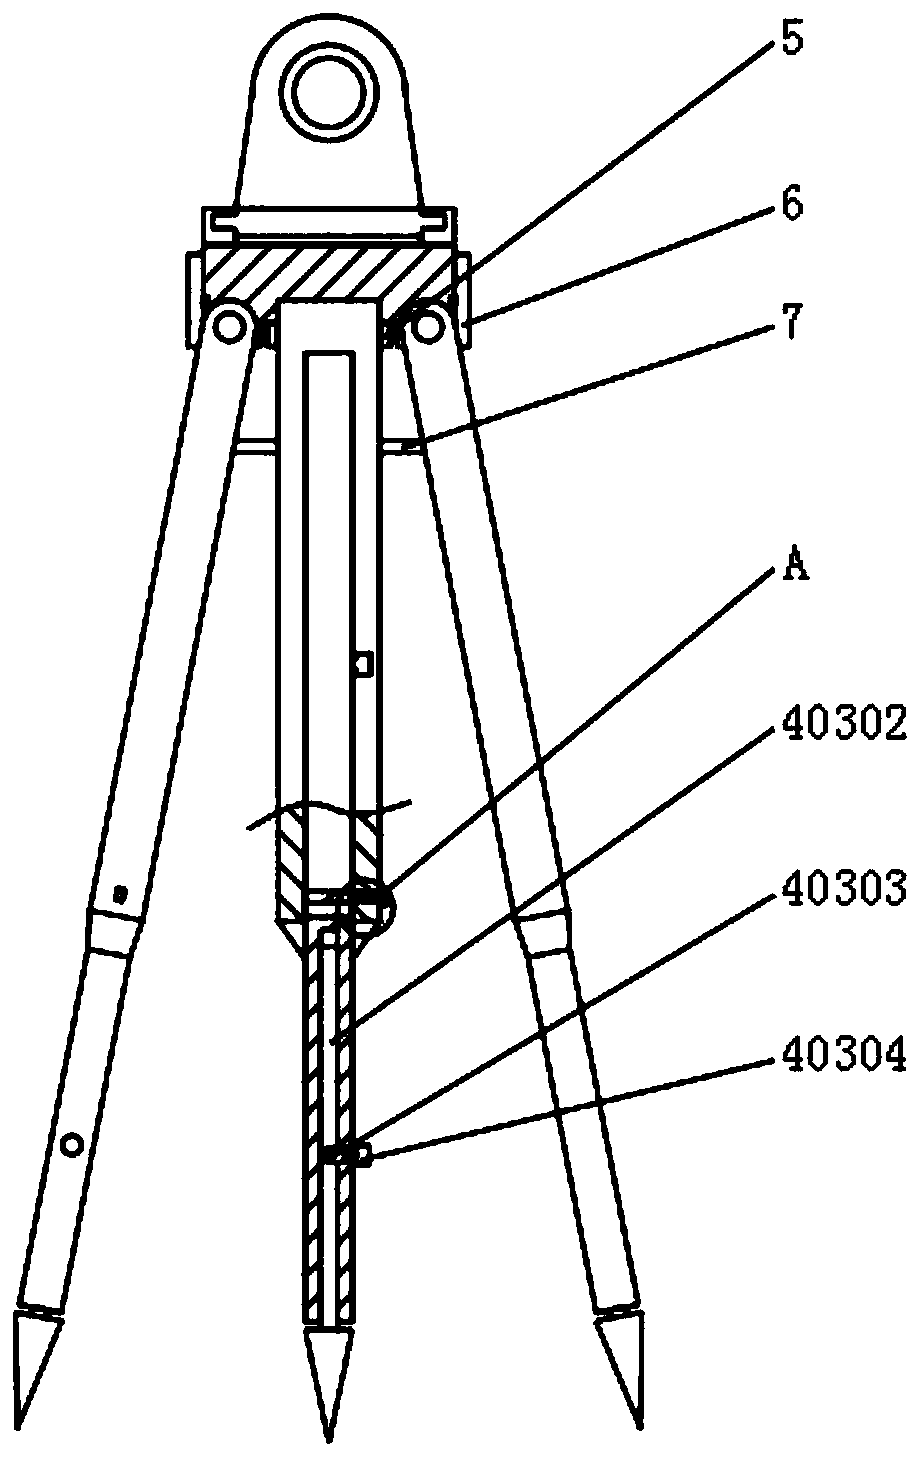 Portable positioning device for engineering surveying and mapping